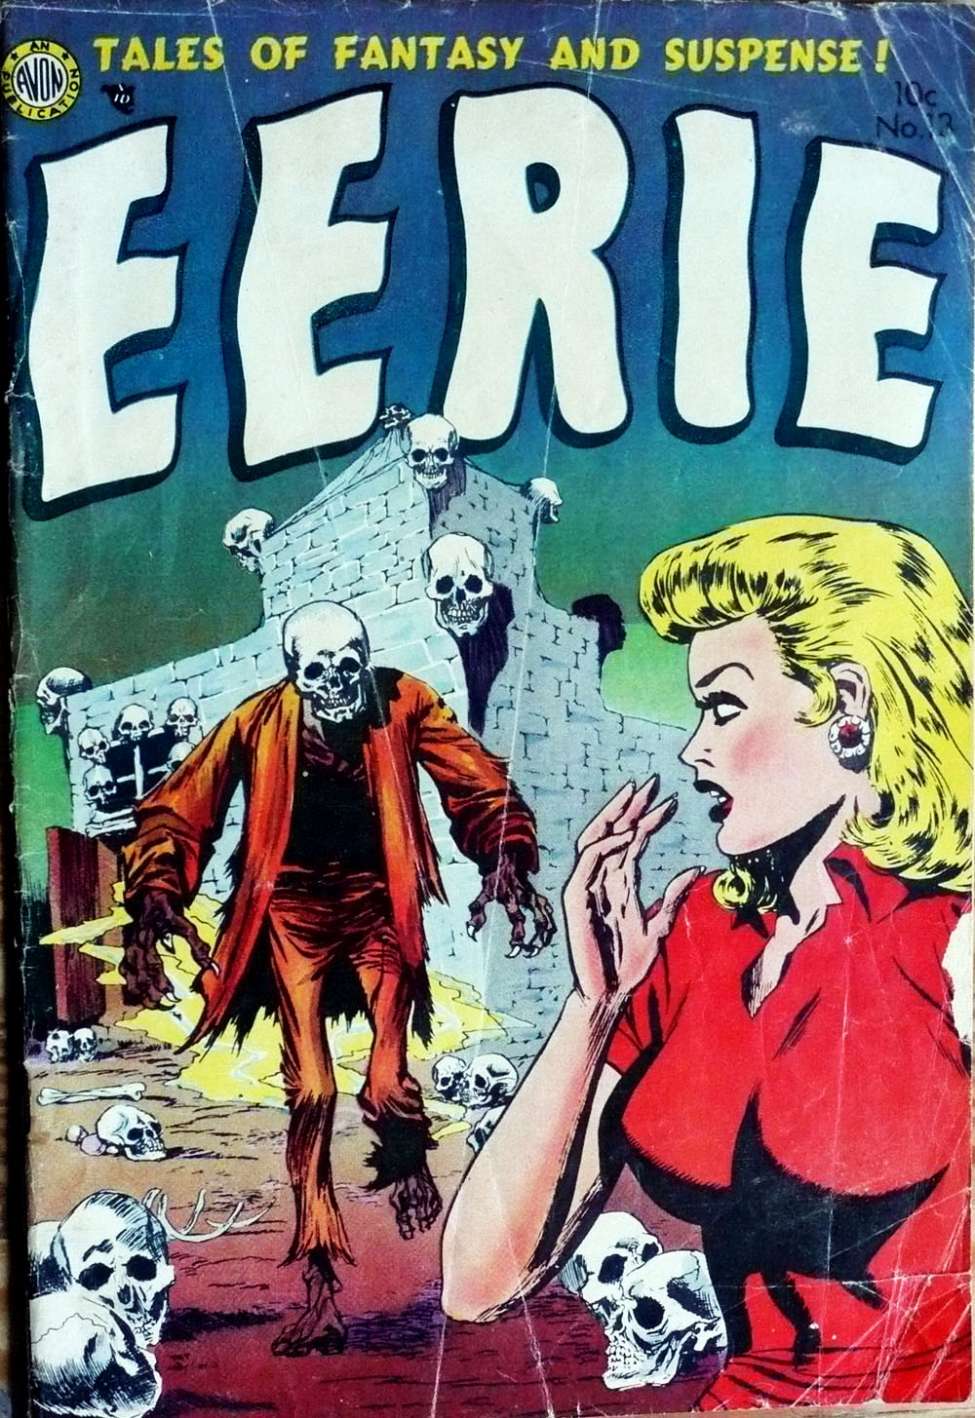 Book Cover For Eerie 13 (digcam)